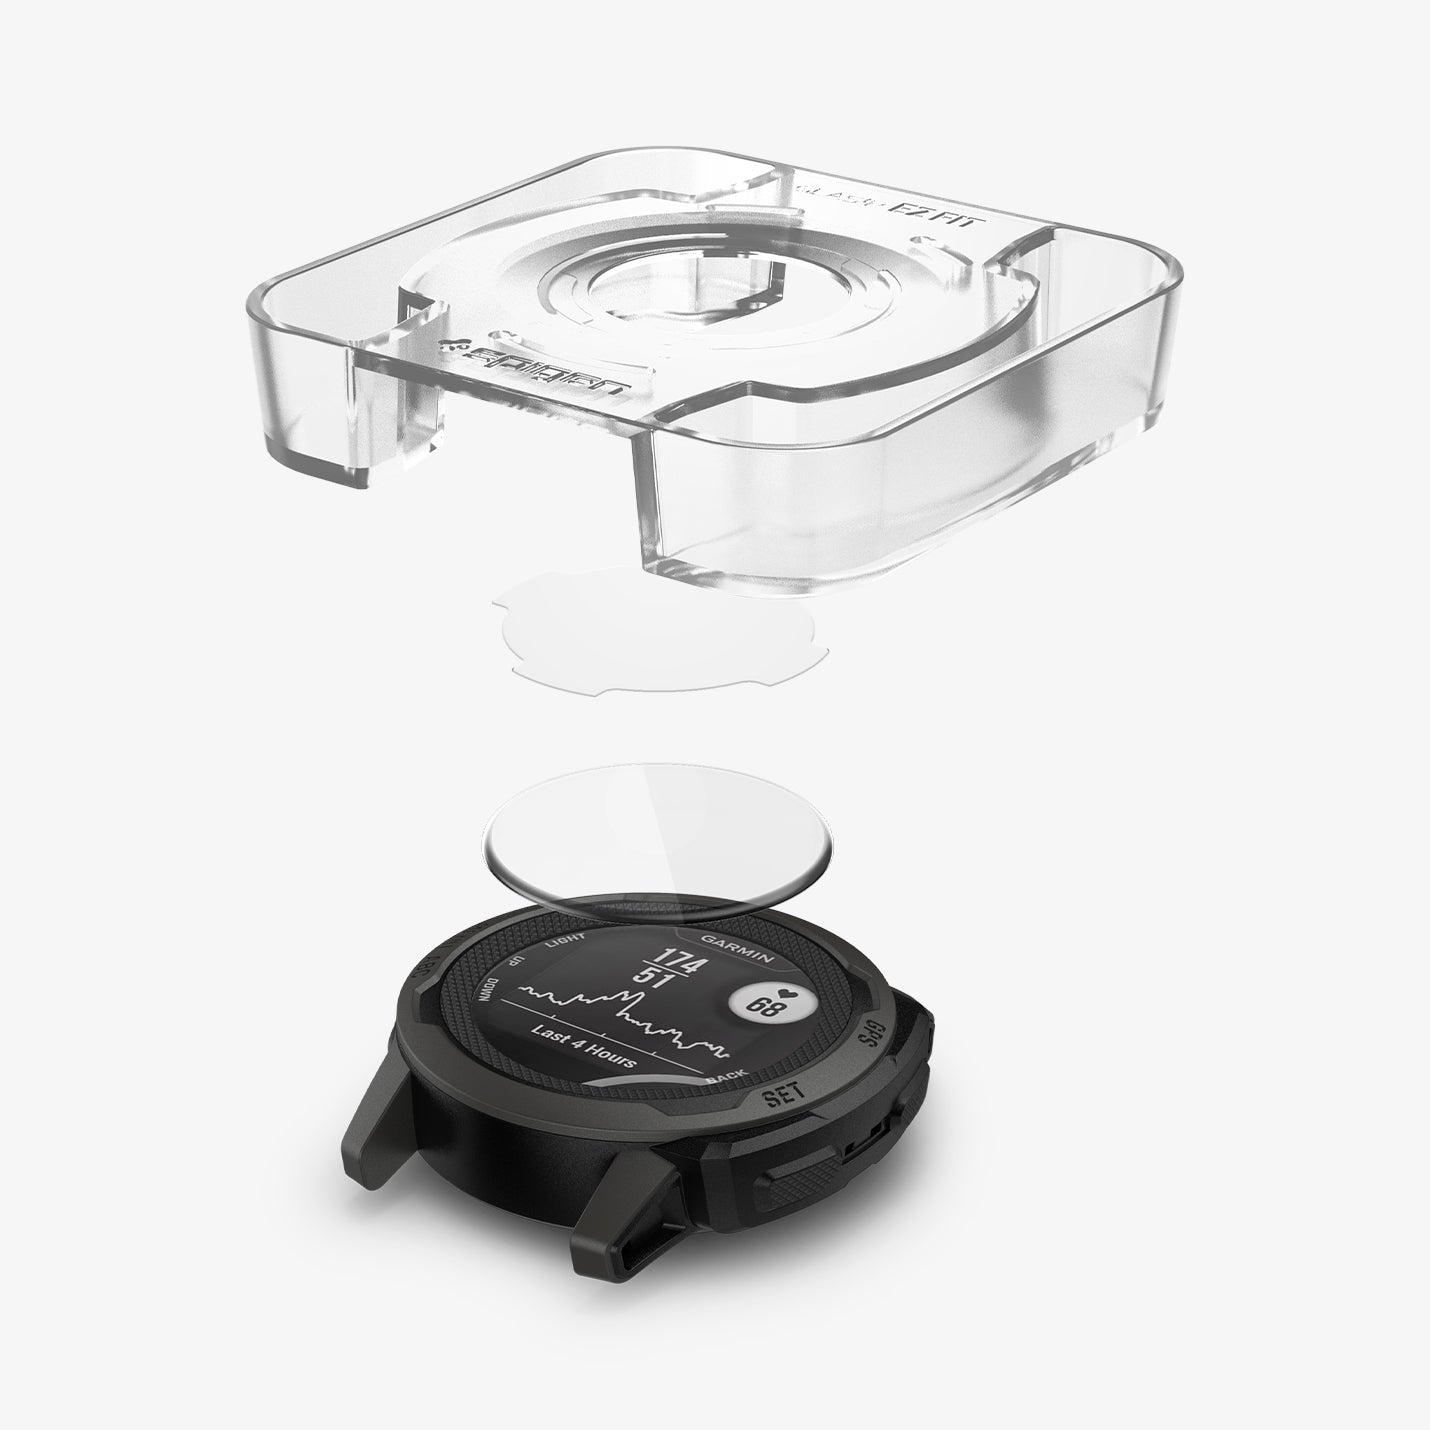 AGL04797 - Garmin Instinct 2 Screen Protector EZ FIT Glas.tR showing the ez fit tray and screen protector hovering above the watch face